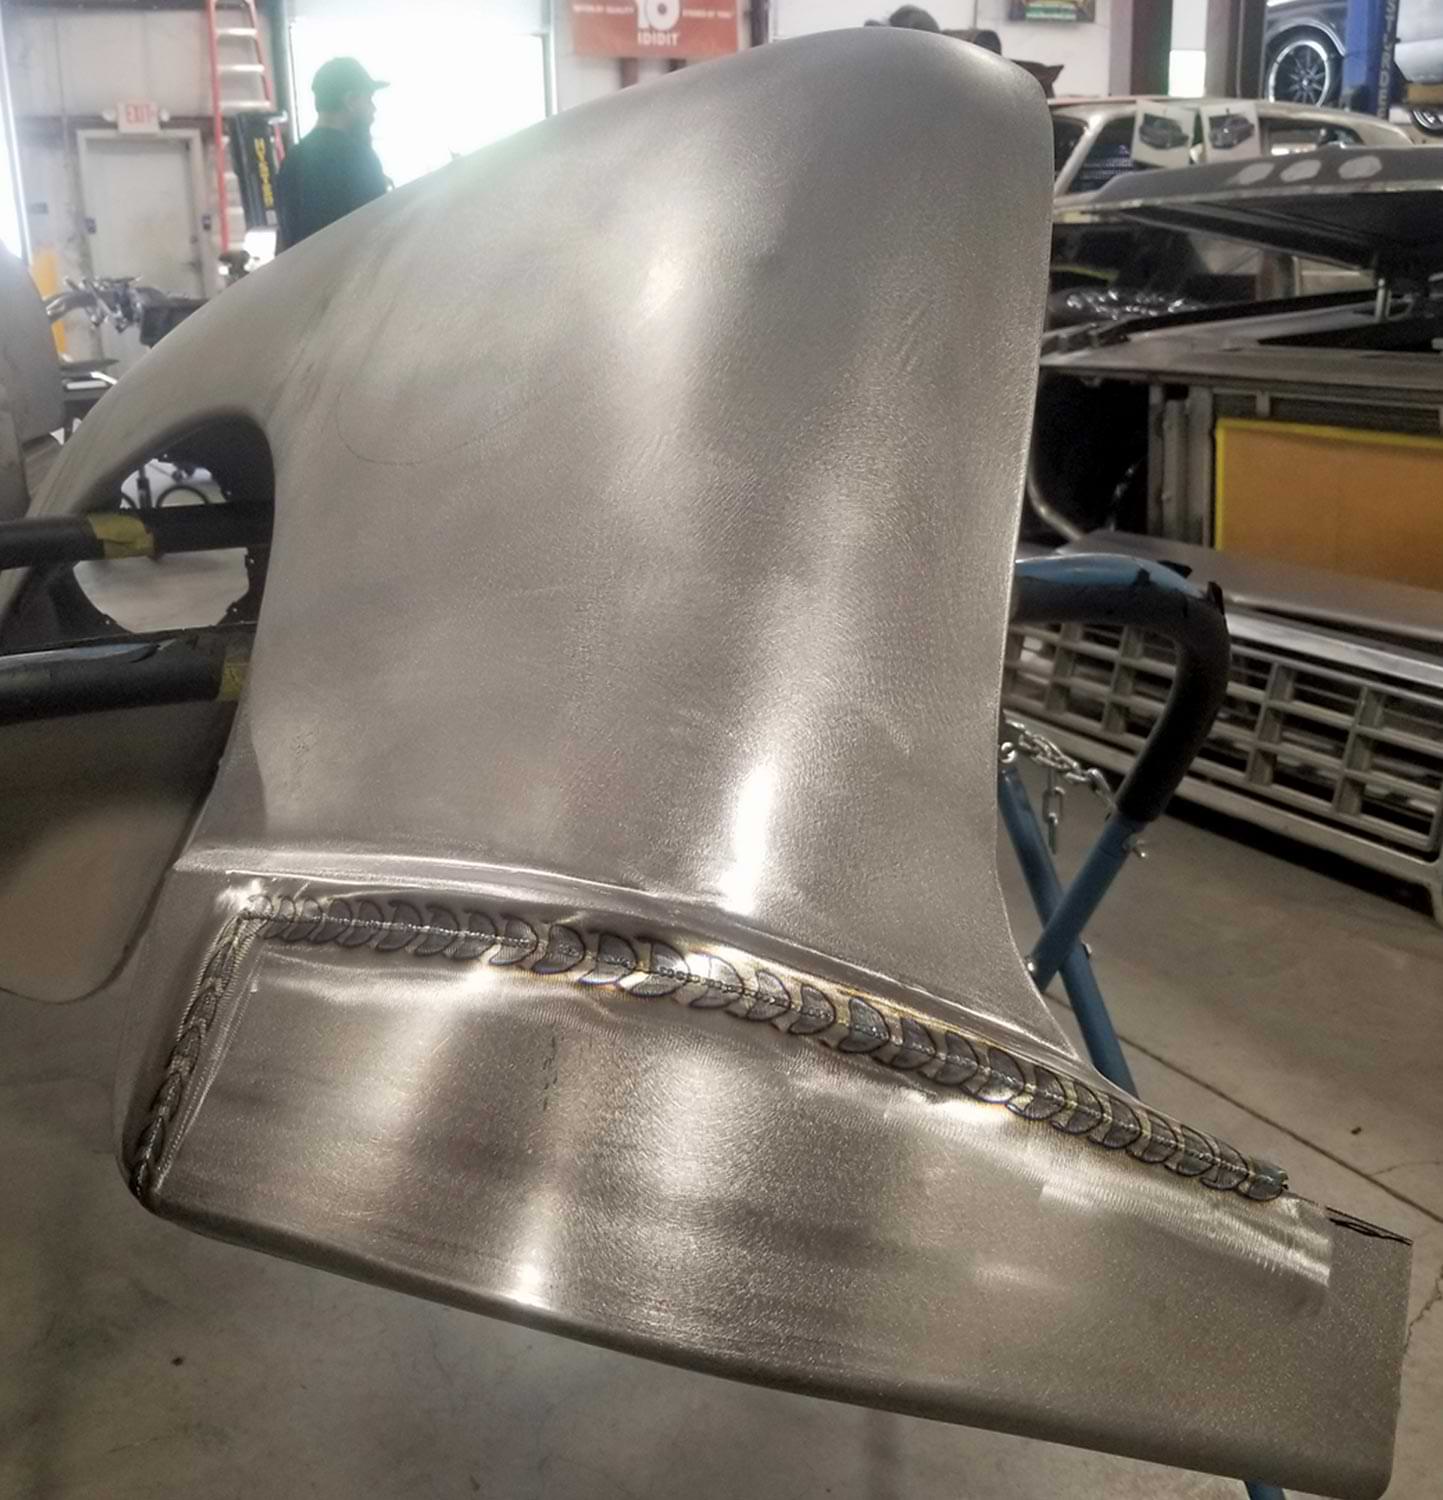 rear half of the driver side front fender in the middle of metalworking